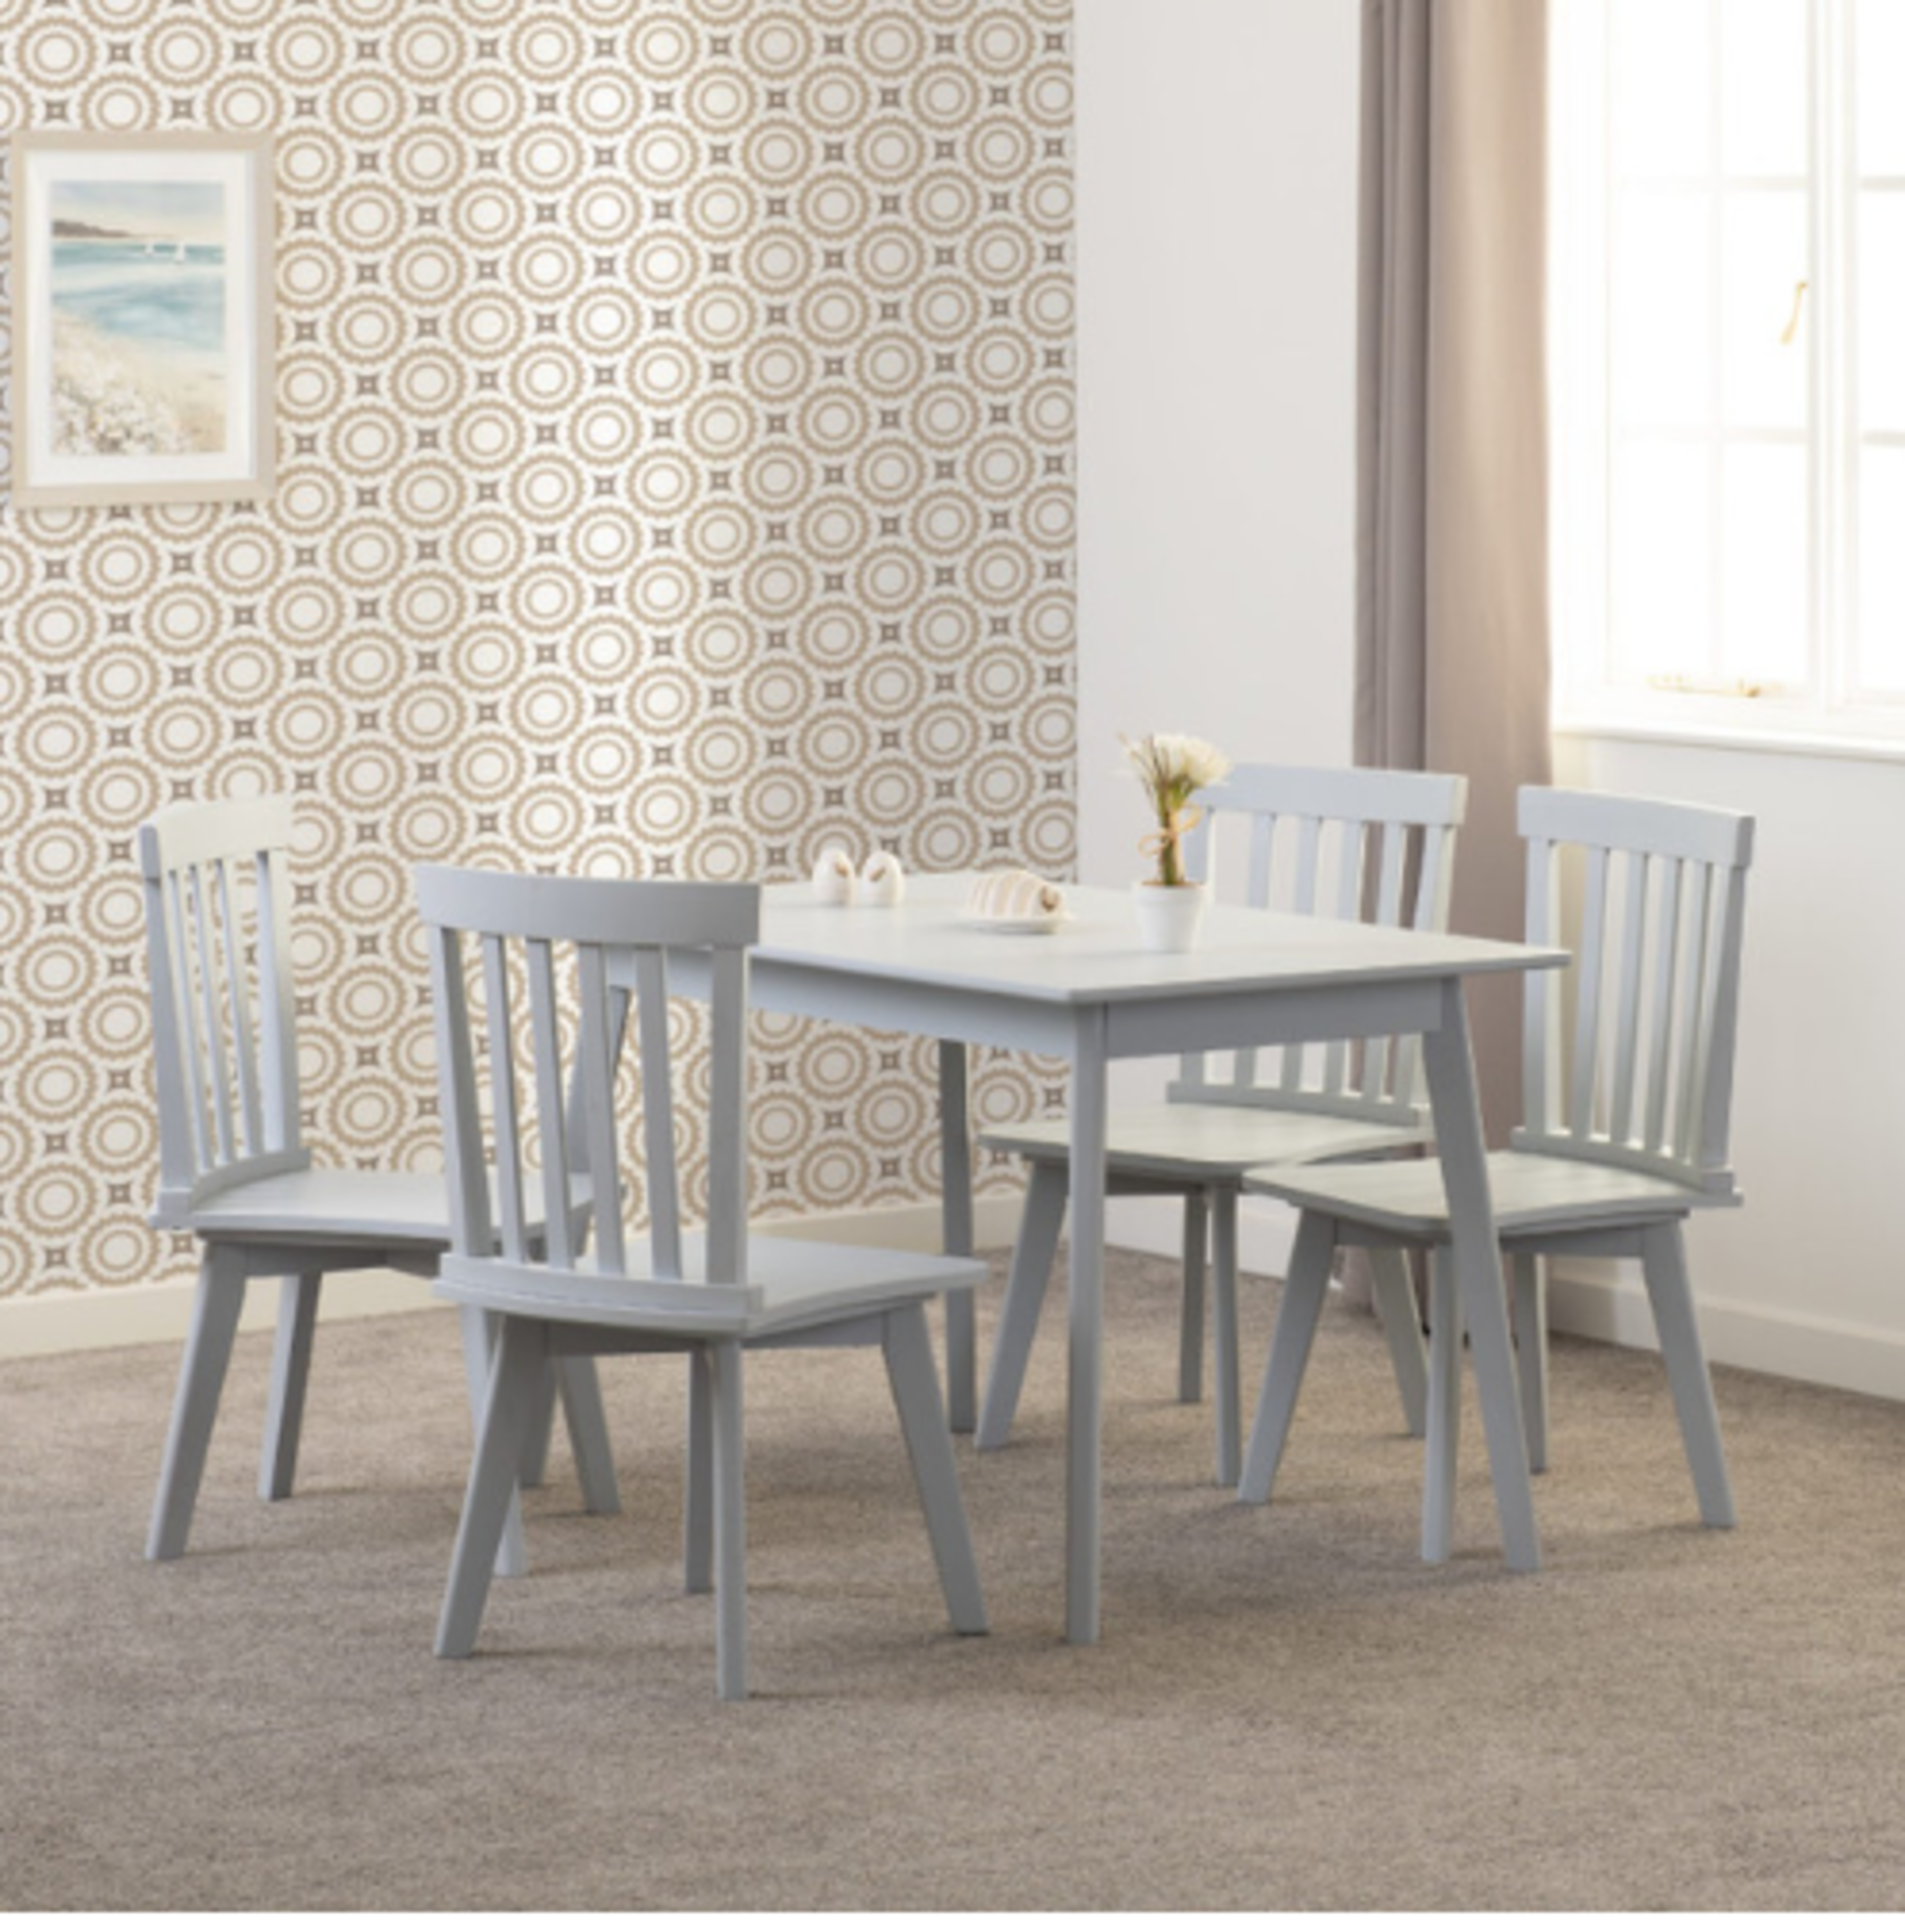 *EX DISPLAY* Matlock grey wooden 4 seater dining set. RRP: £299 - Image 3 of 4